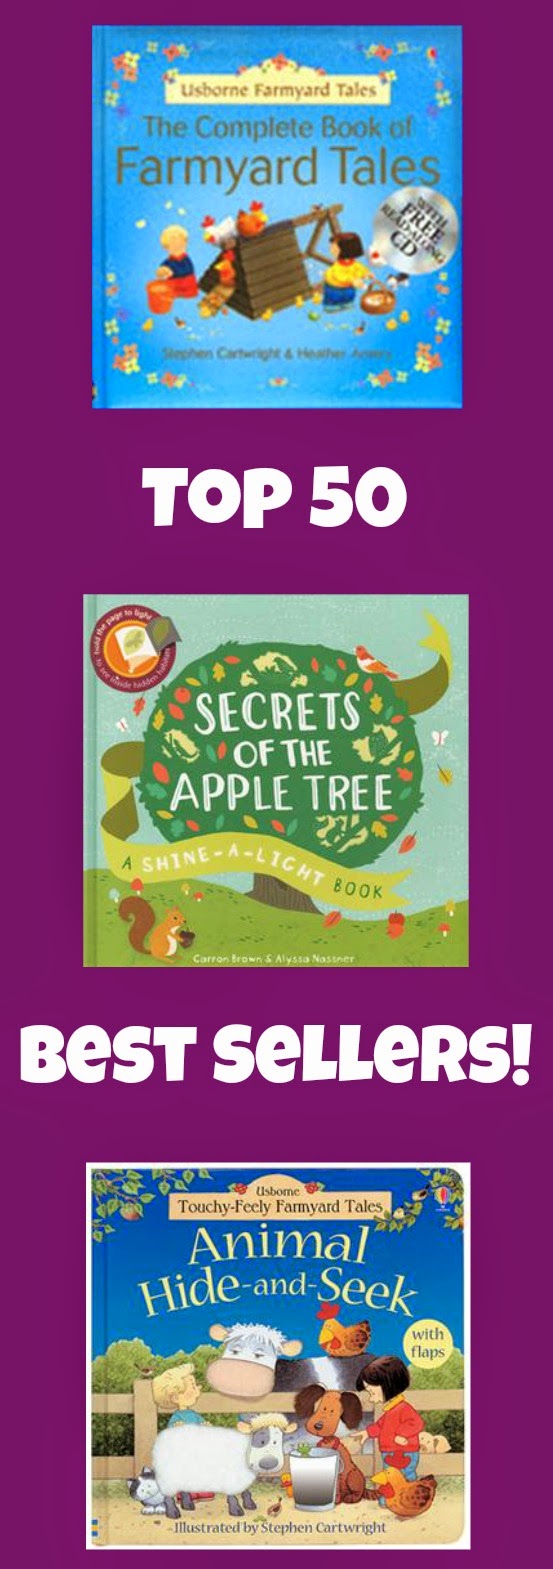 Click on image to be taken to our top 50 sellers!